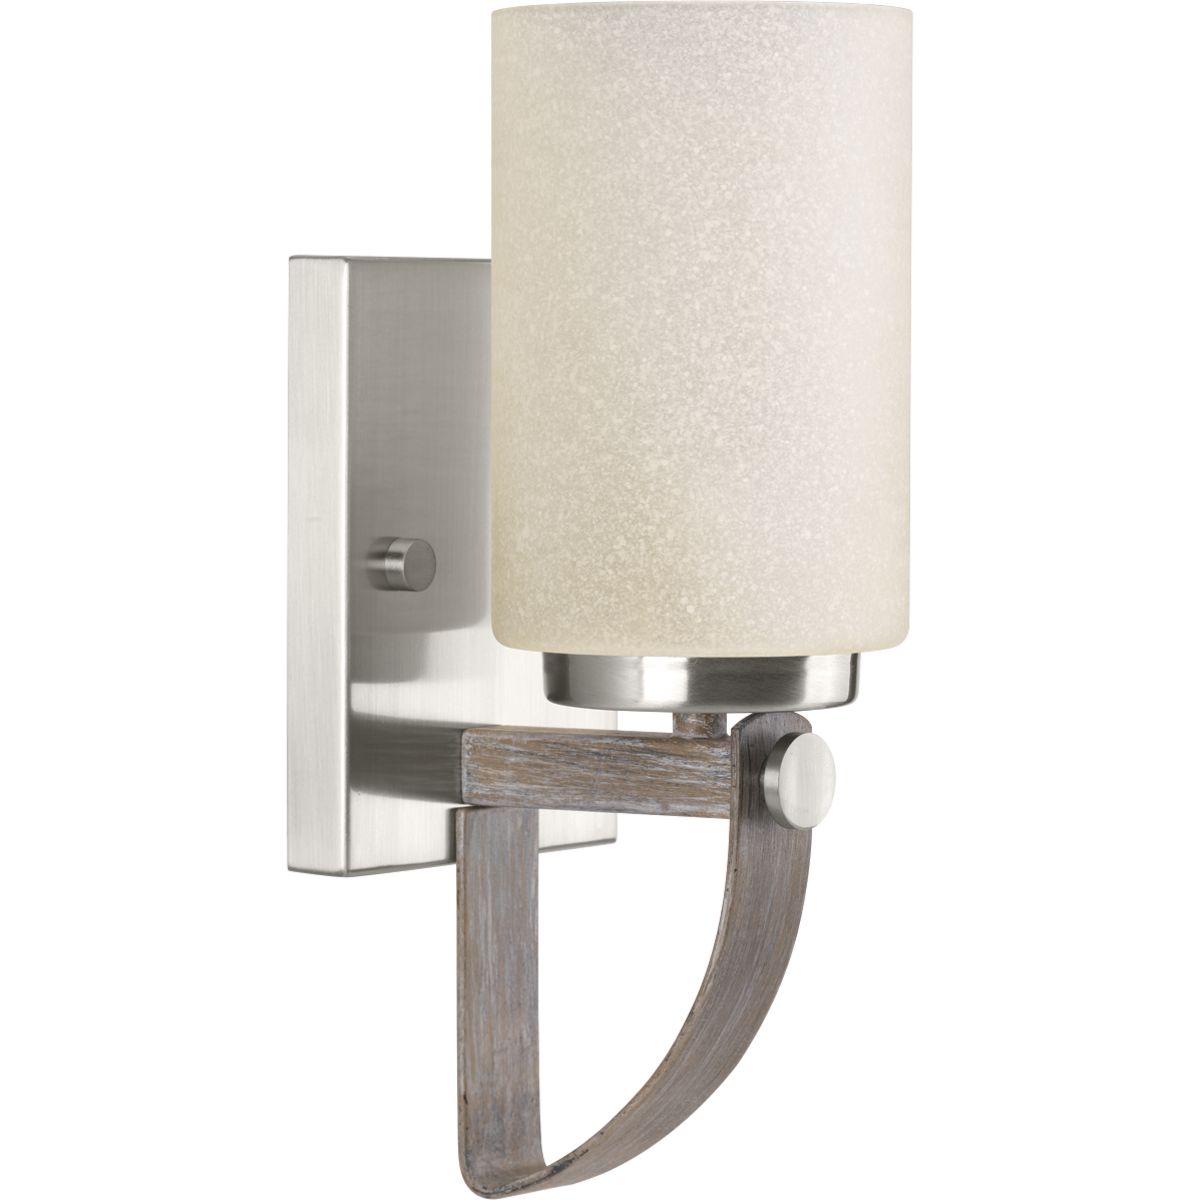 Fixtures within the Aspen Creek collection offer a handsome look for a modern farmhouse or rustic living spaces. Featuring a steel design frame painted to emulate driftwood with Brushed Nickel accents add a modern element. Etched natural parchment glass shade complete the look for this wall sconce.